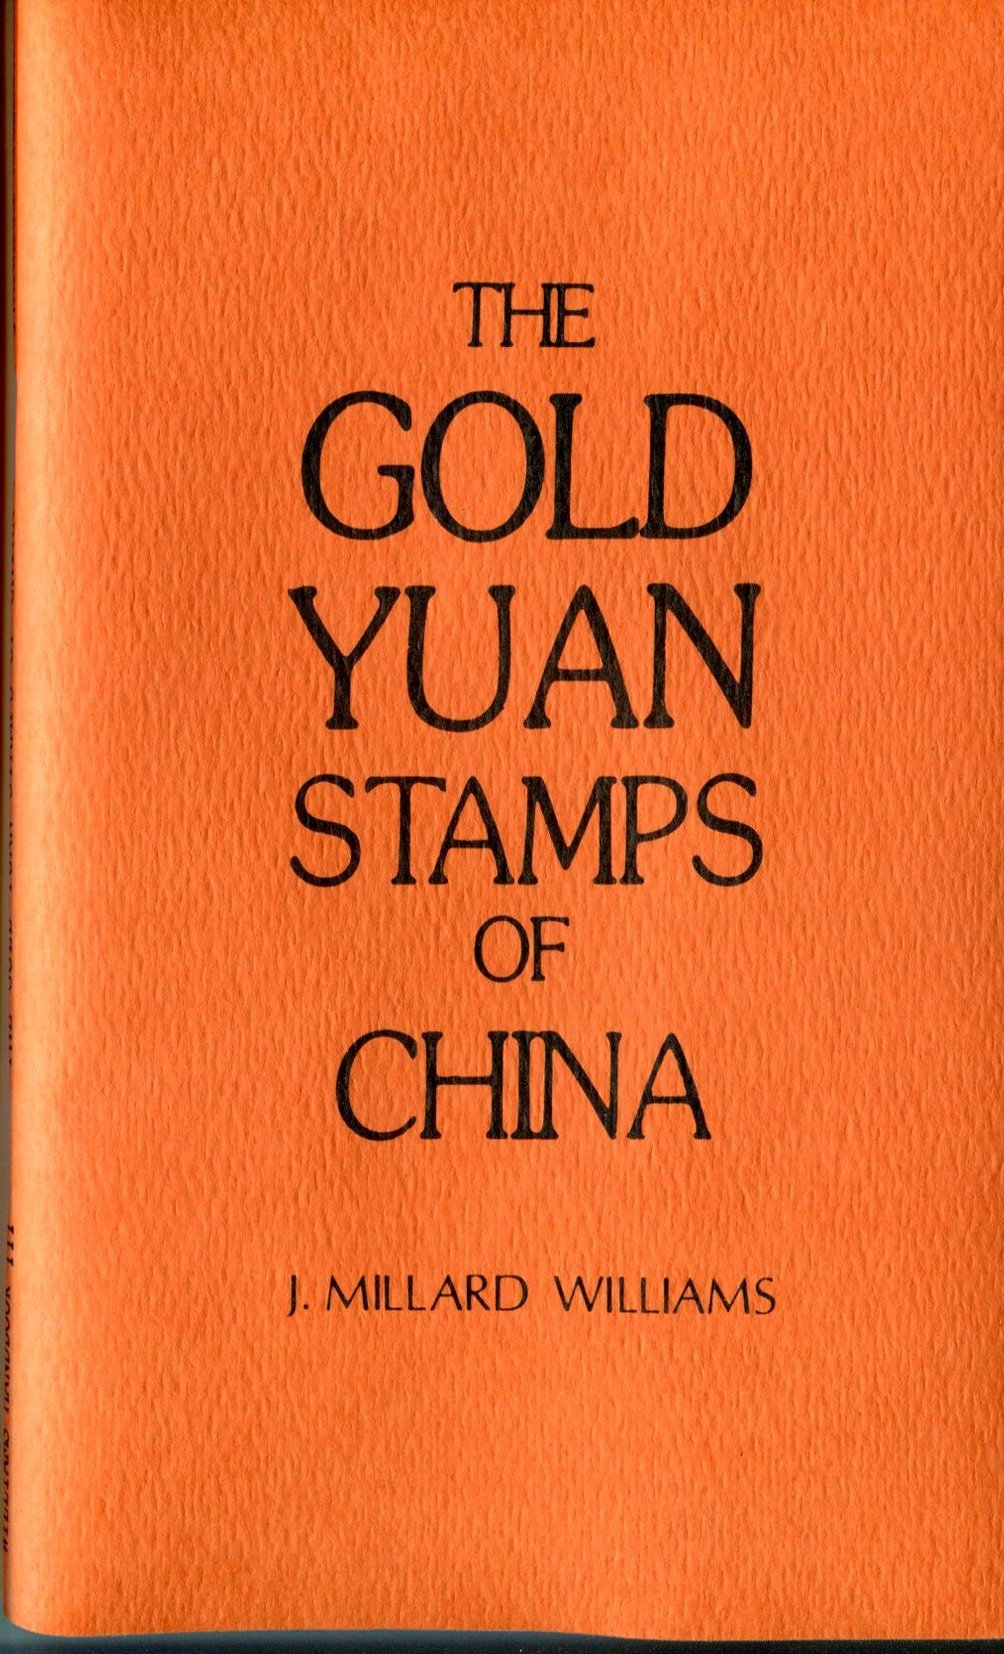 J. Millard Williams, The Gold Yuan Stamps of China, 90 pages, 1977, new condition, paperback (6 oz.)